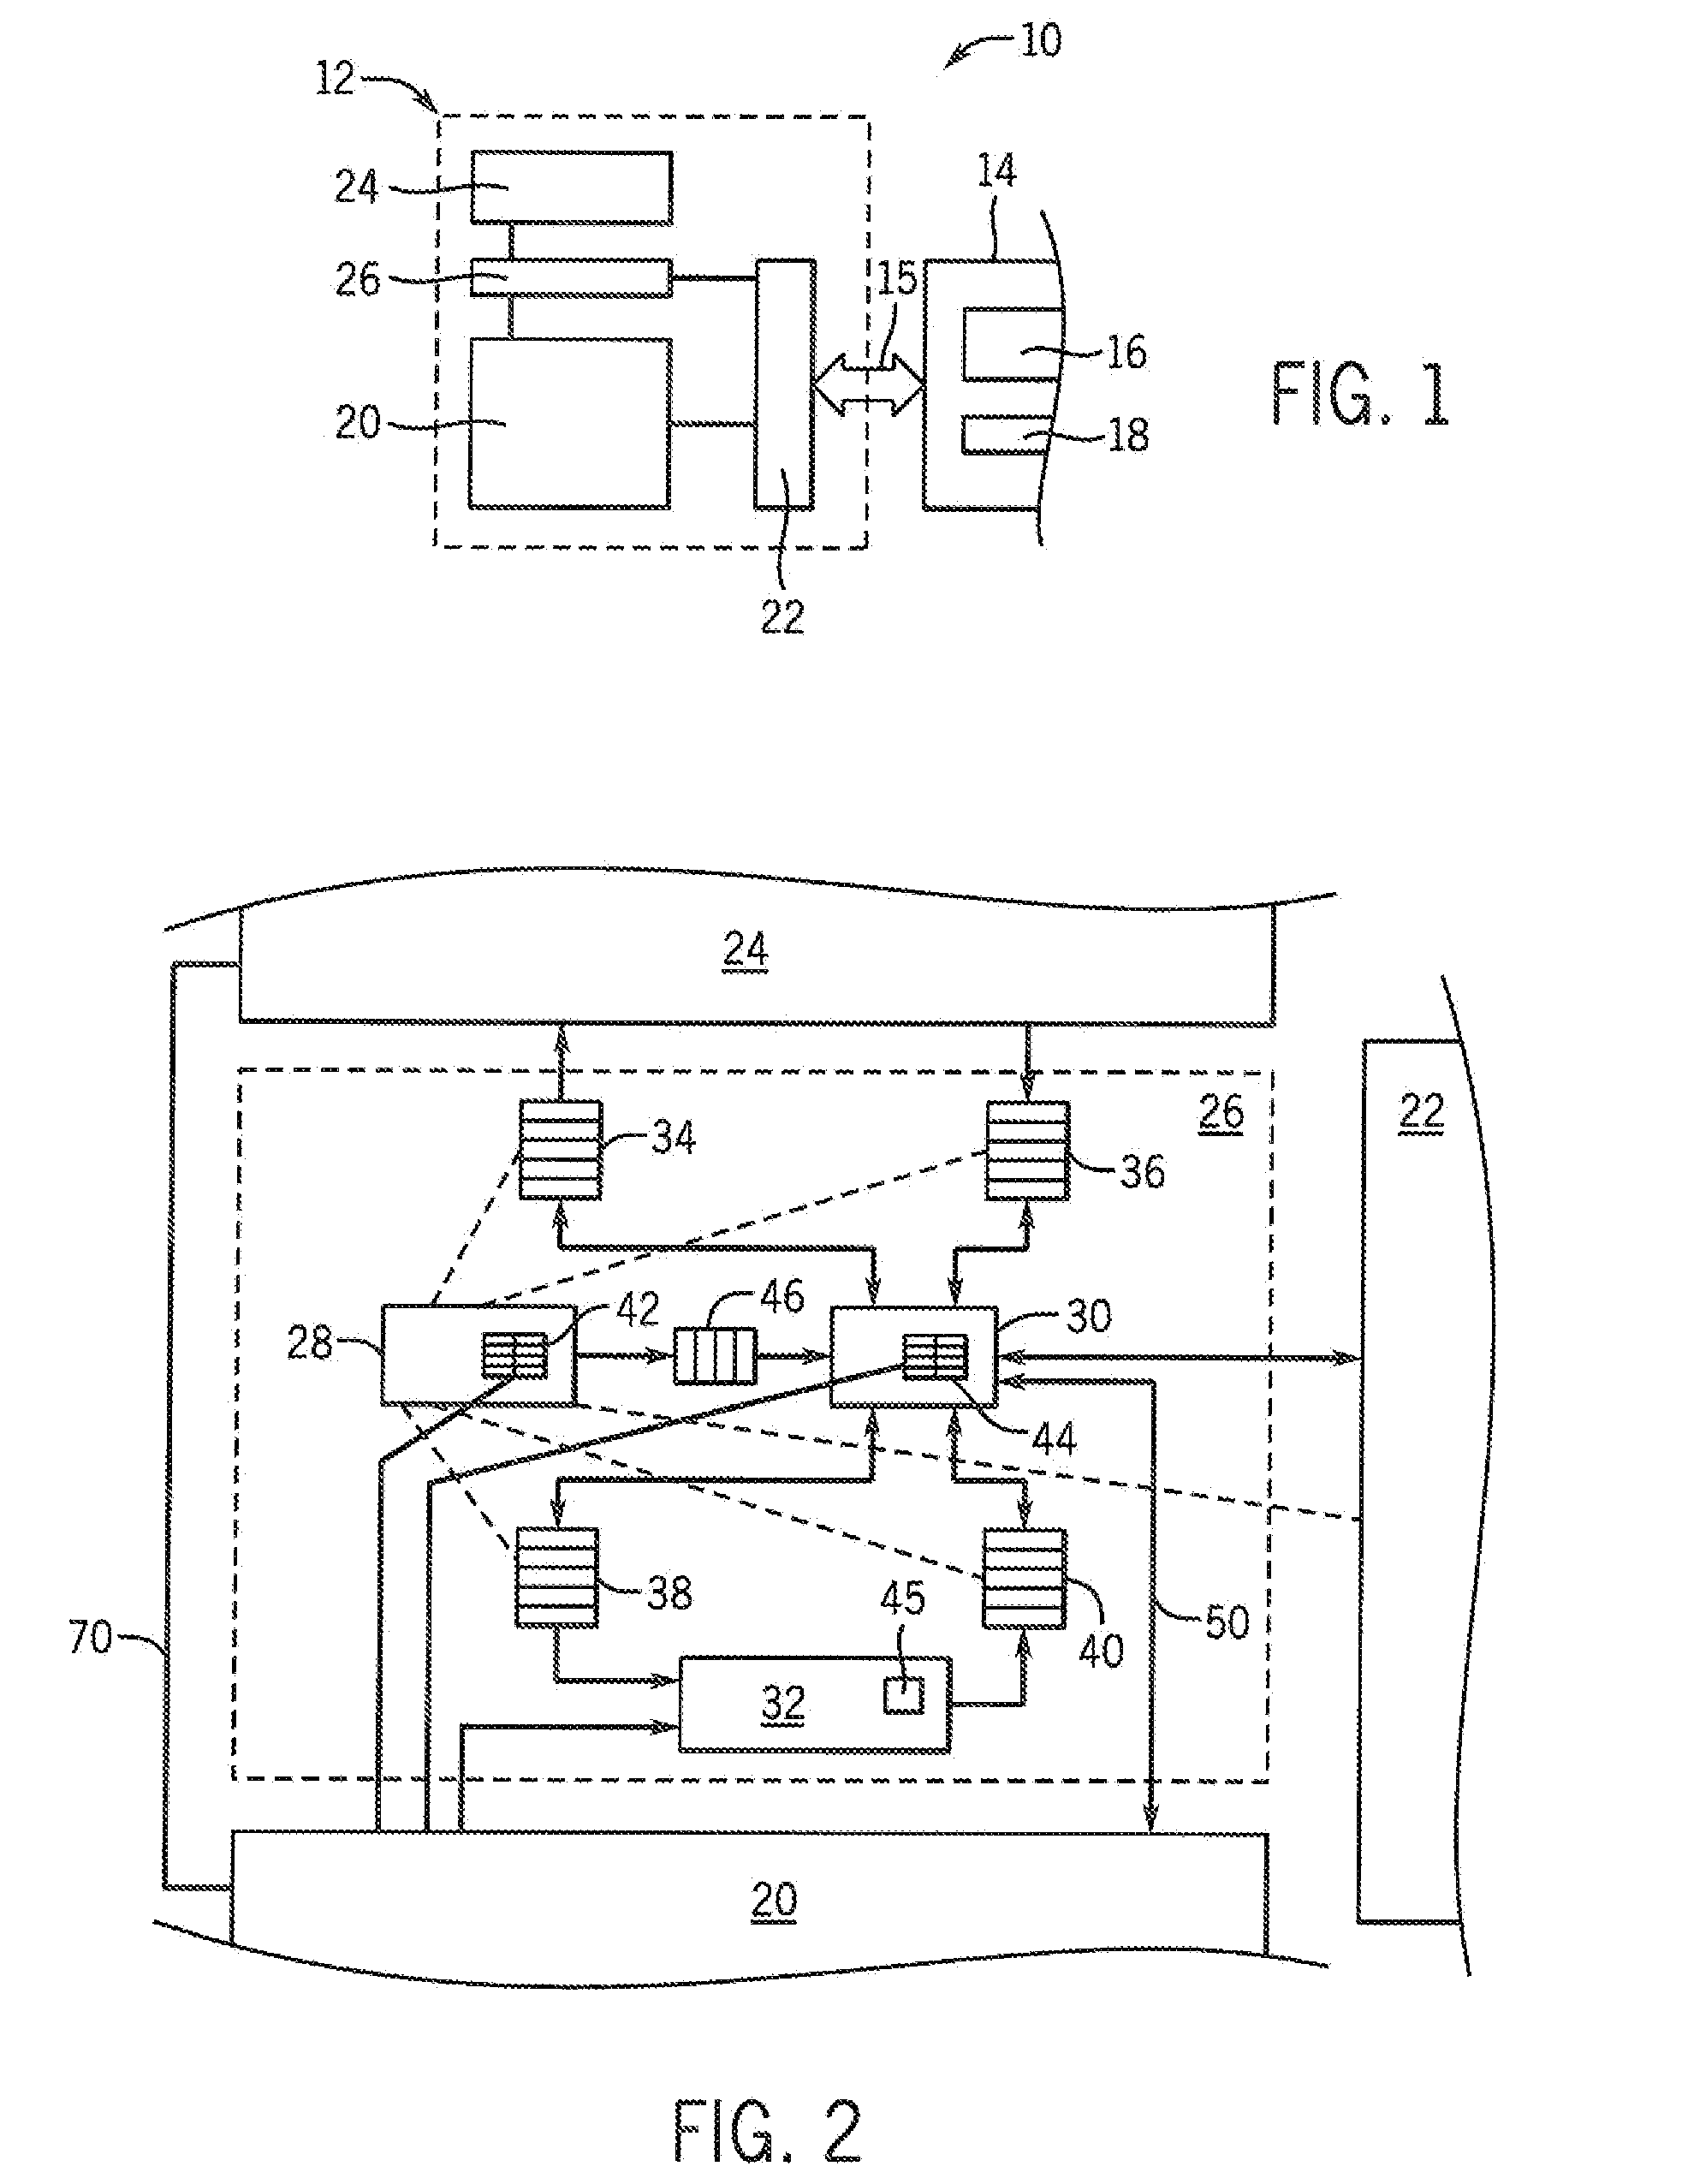 Computer accelerator system with improved efficiency